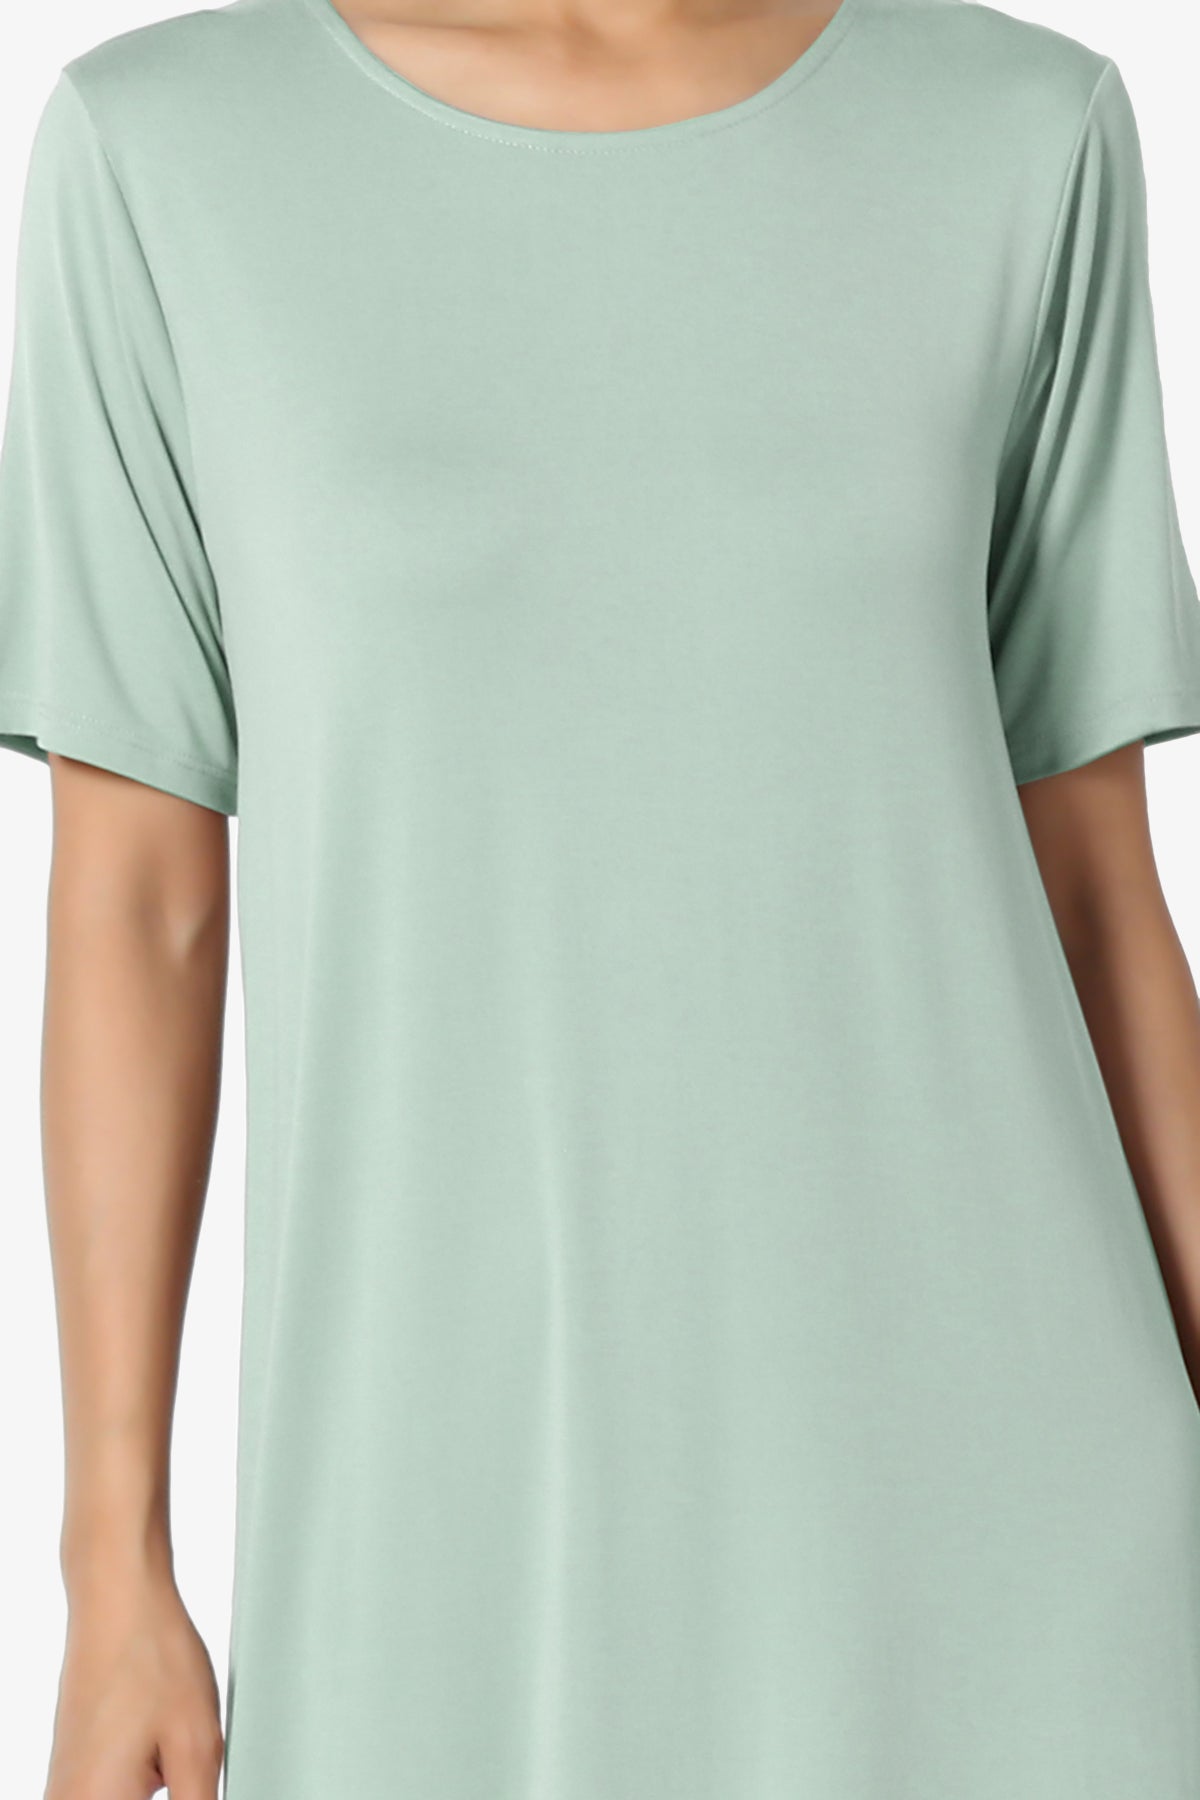 Load image into Gallery viewer, Clearer Modal Maxi T-Shirt Dress
